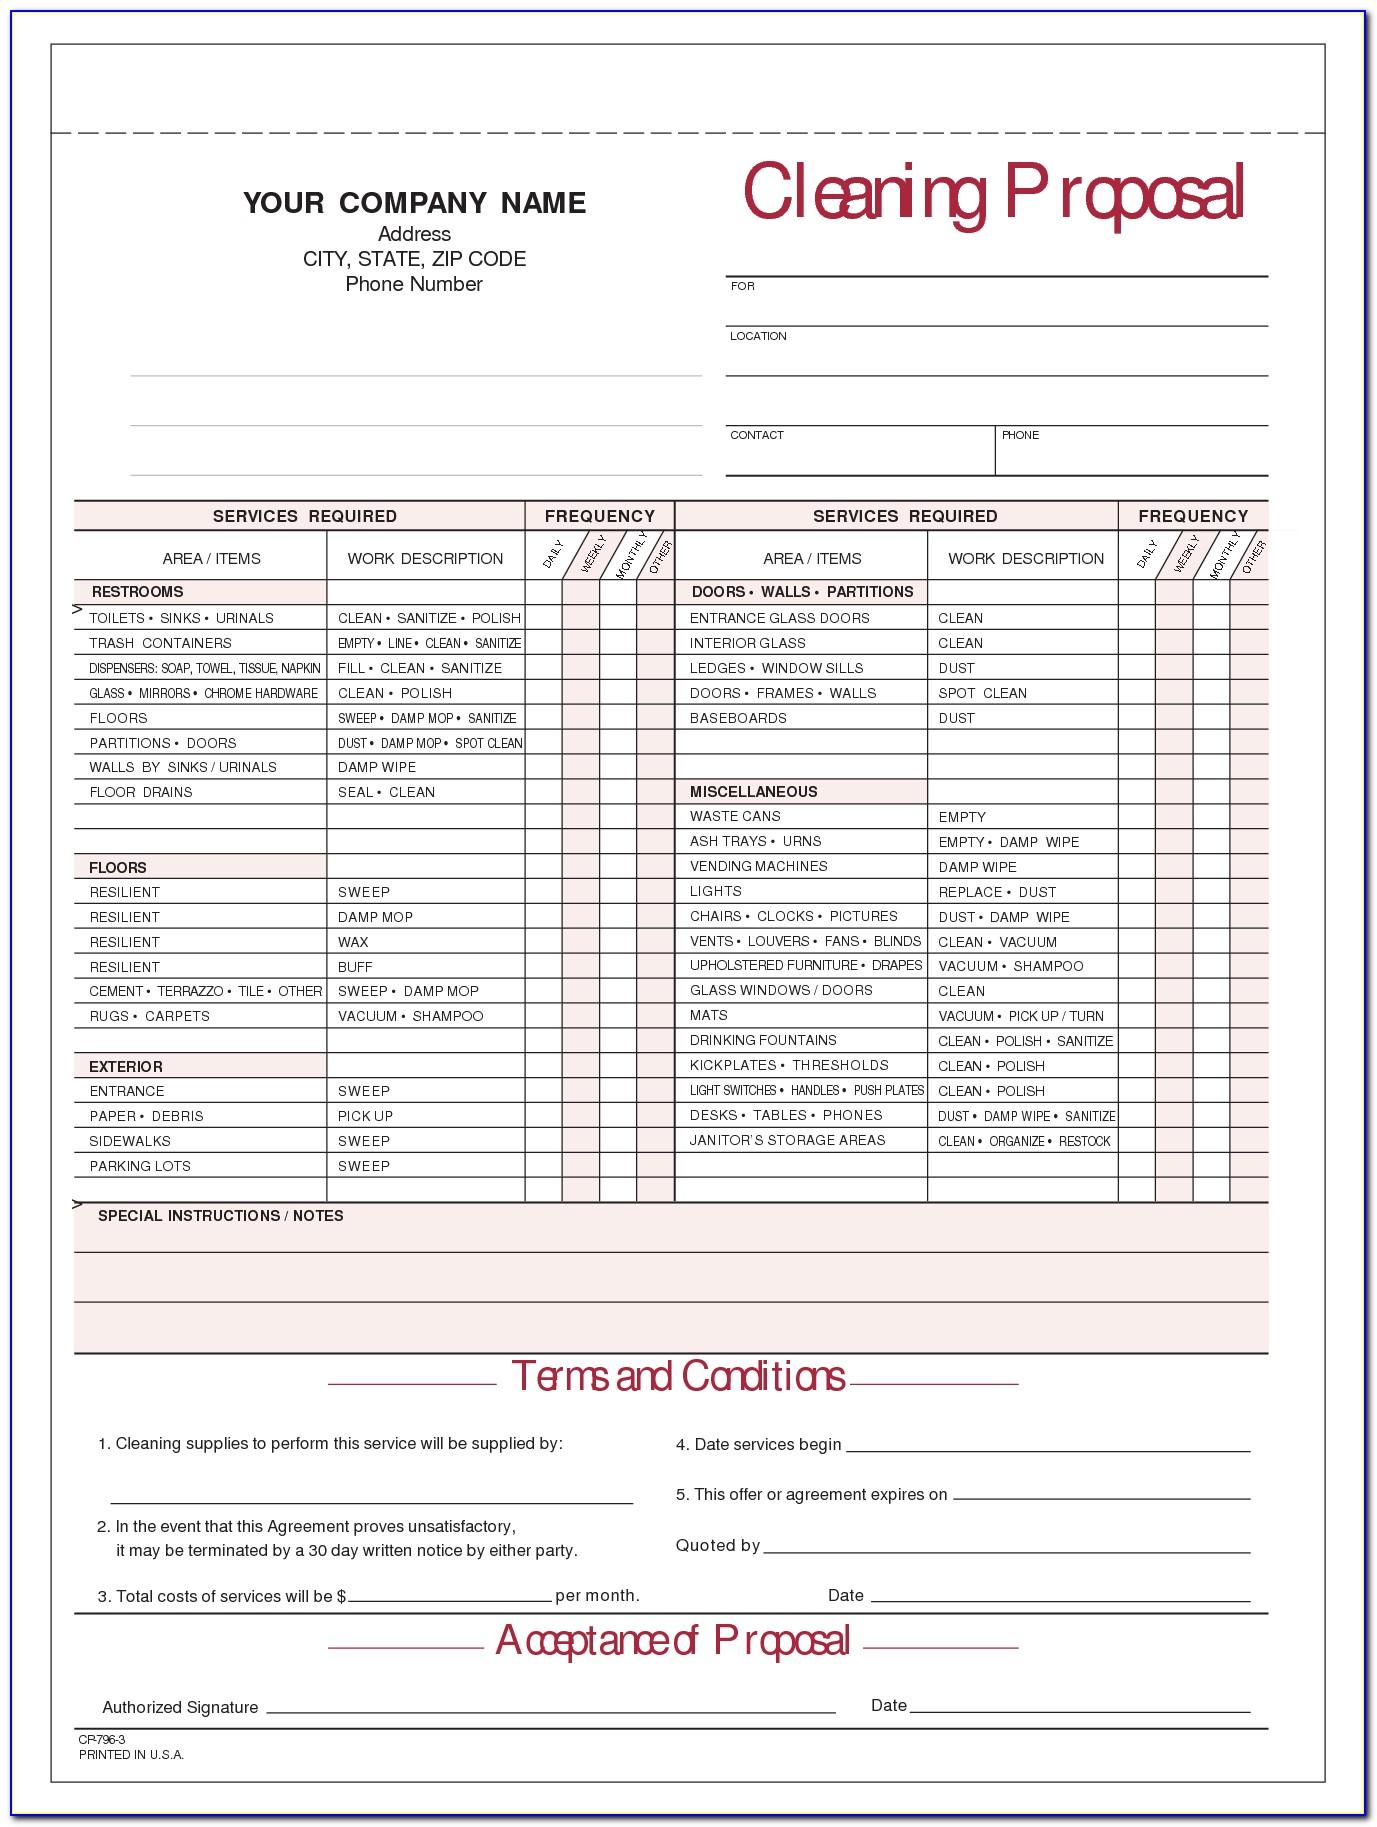 Janitorial Proposal Template Free